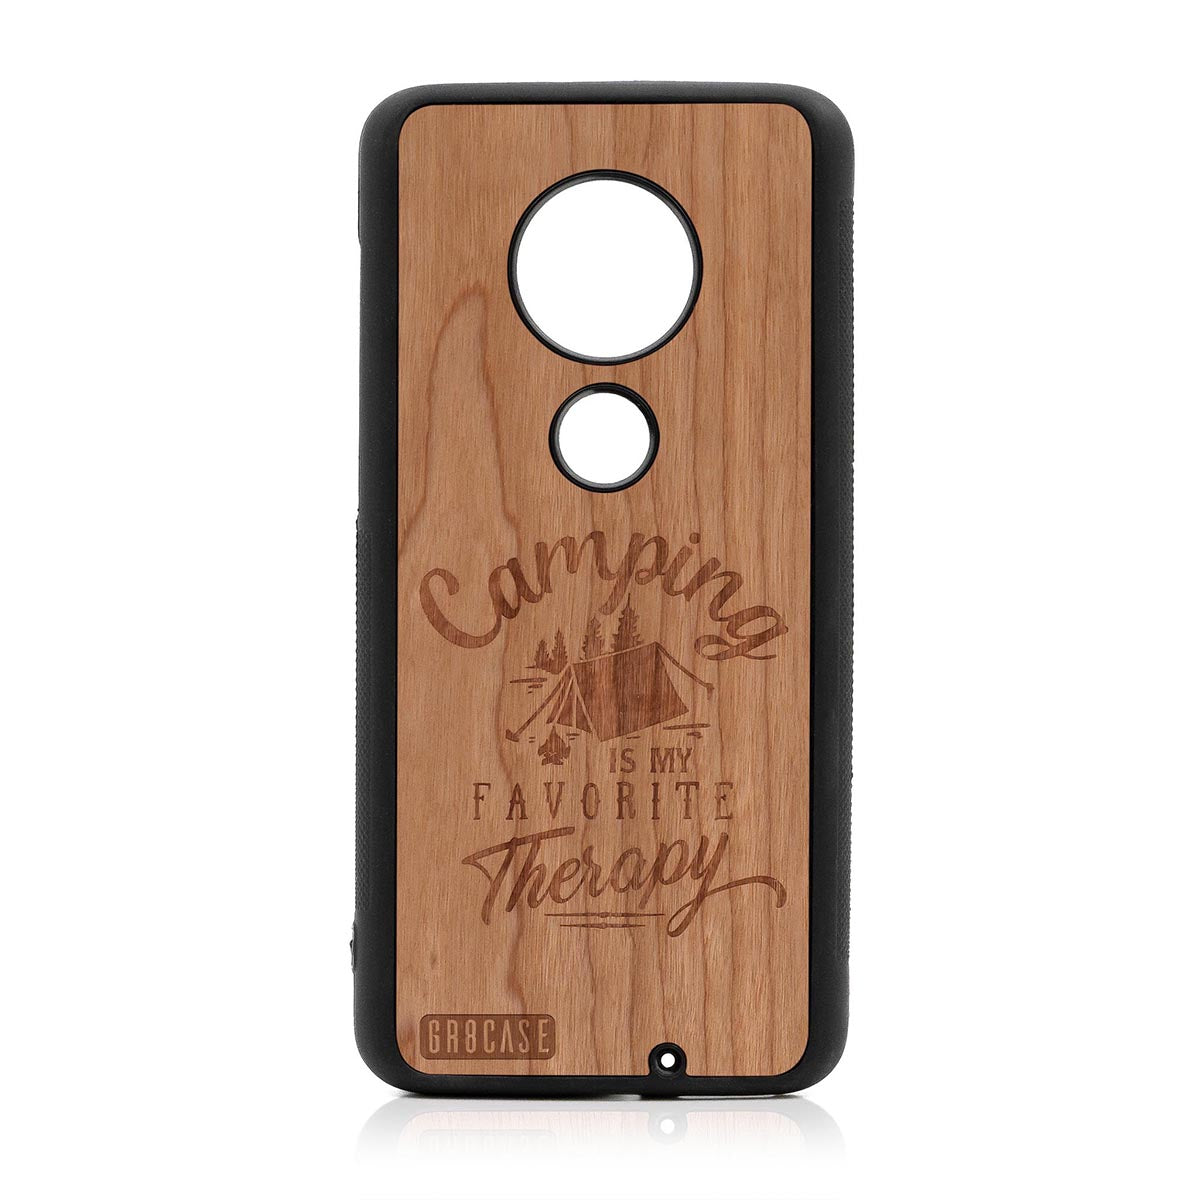 Camping Is My Favorite Therapy Design Wood Case Moto G7 Plus by GR8CASE